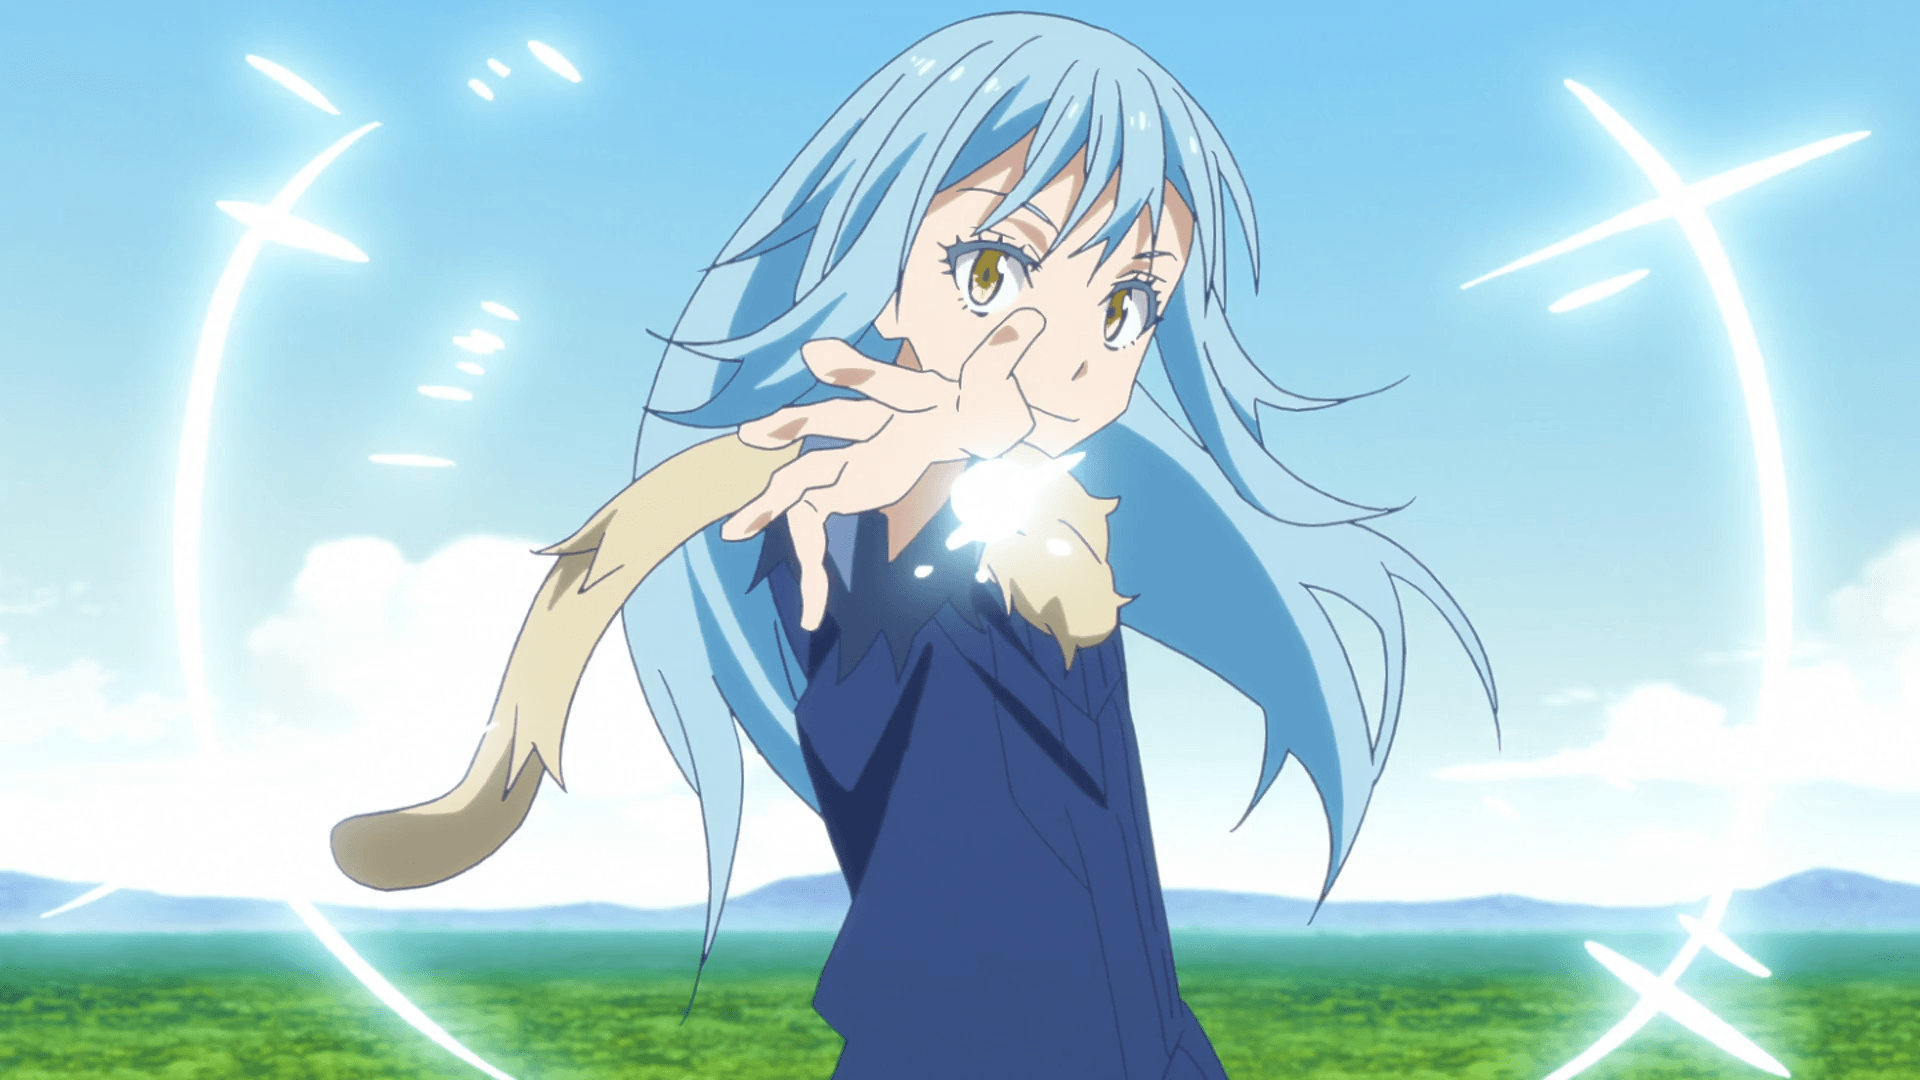 That Time I Got Reincarnated as a Slime OP 1.